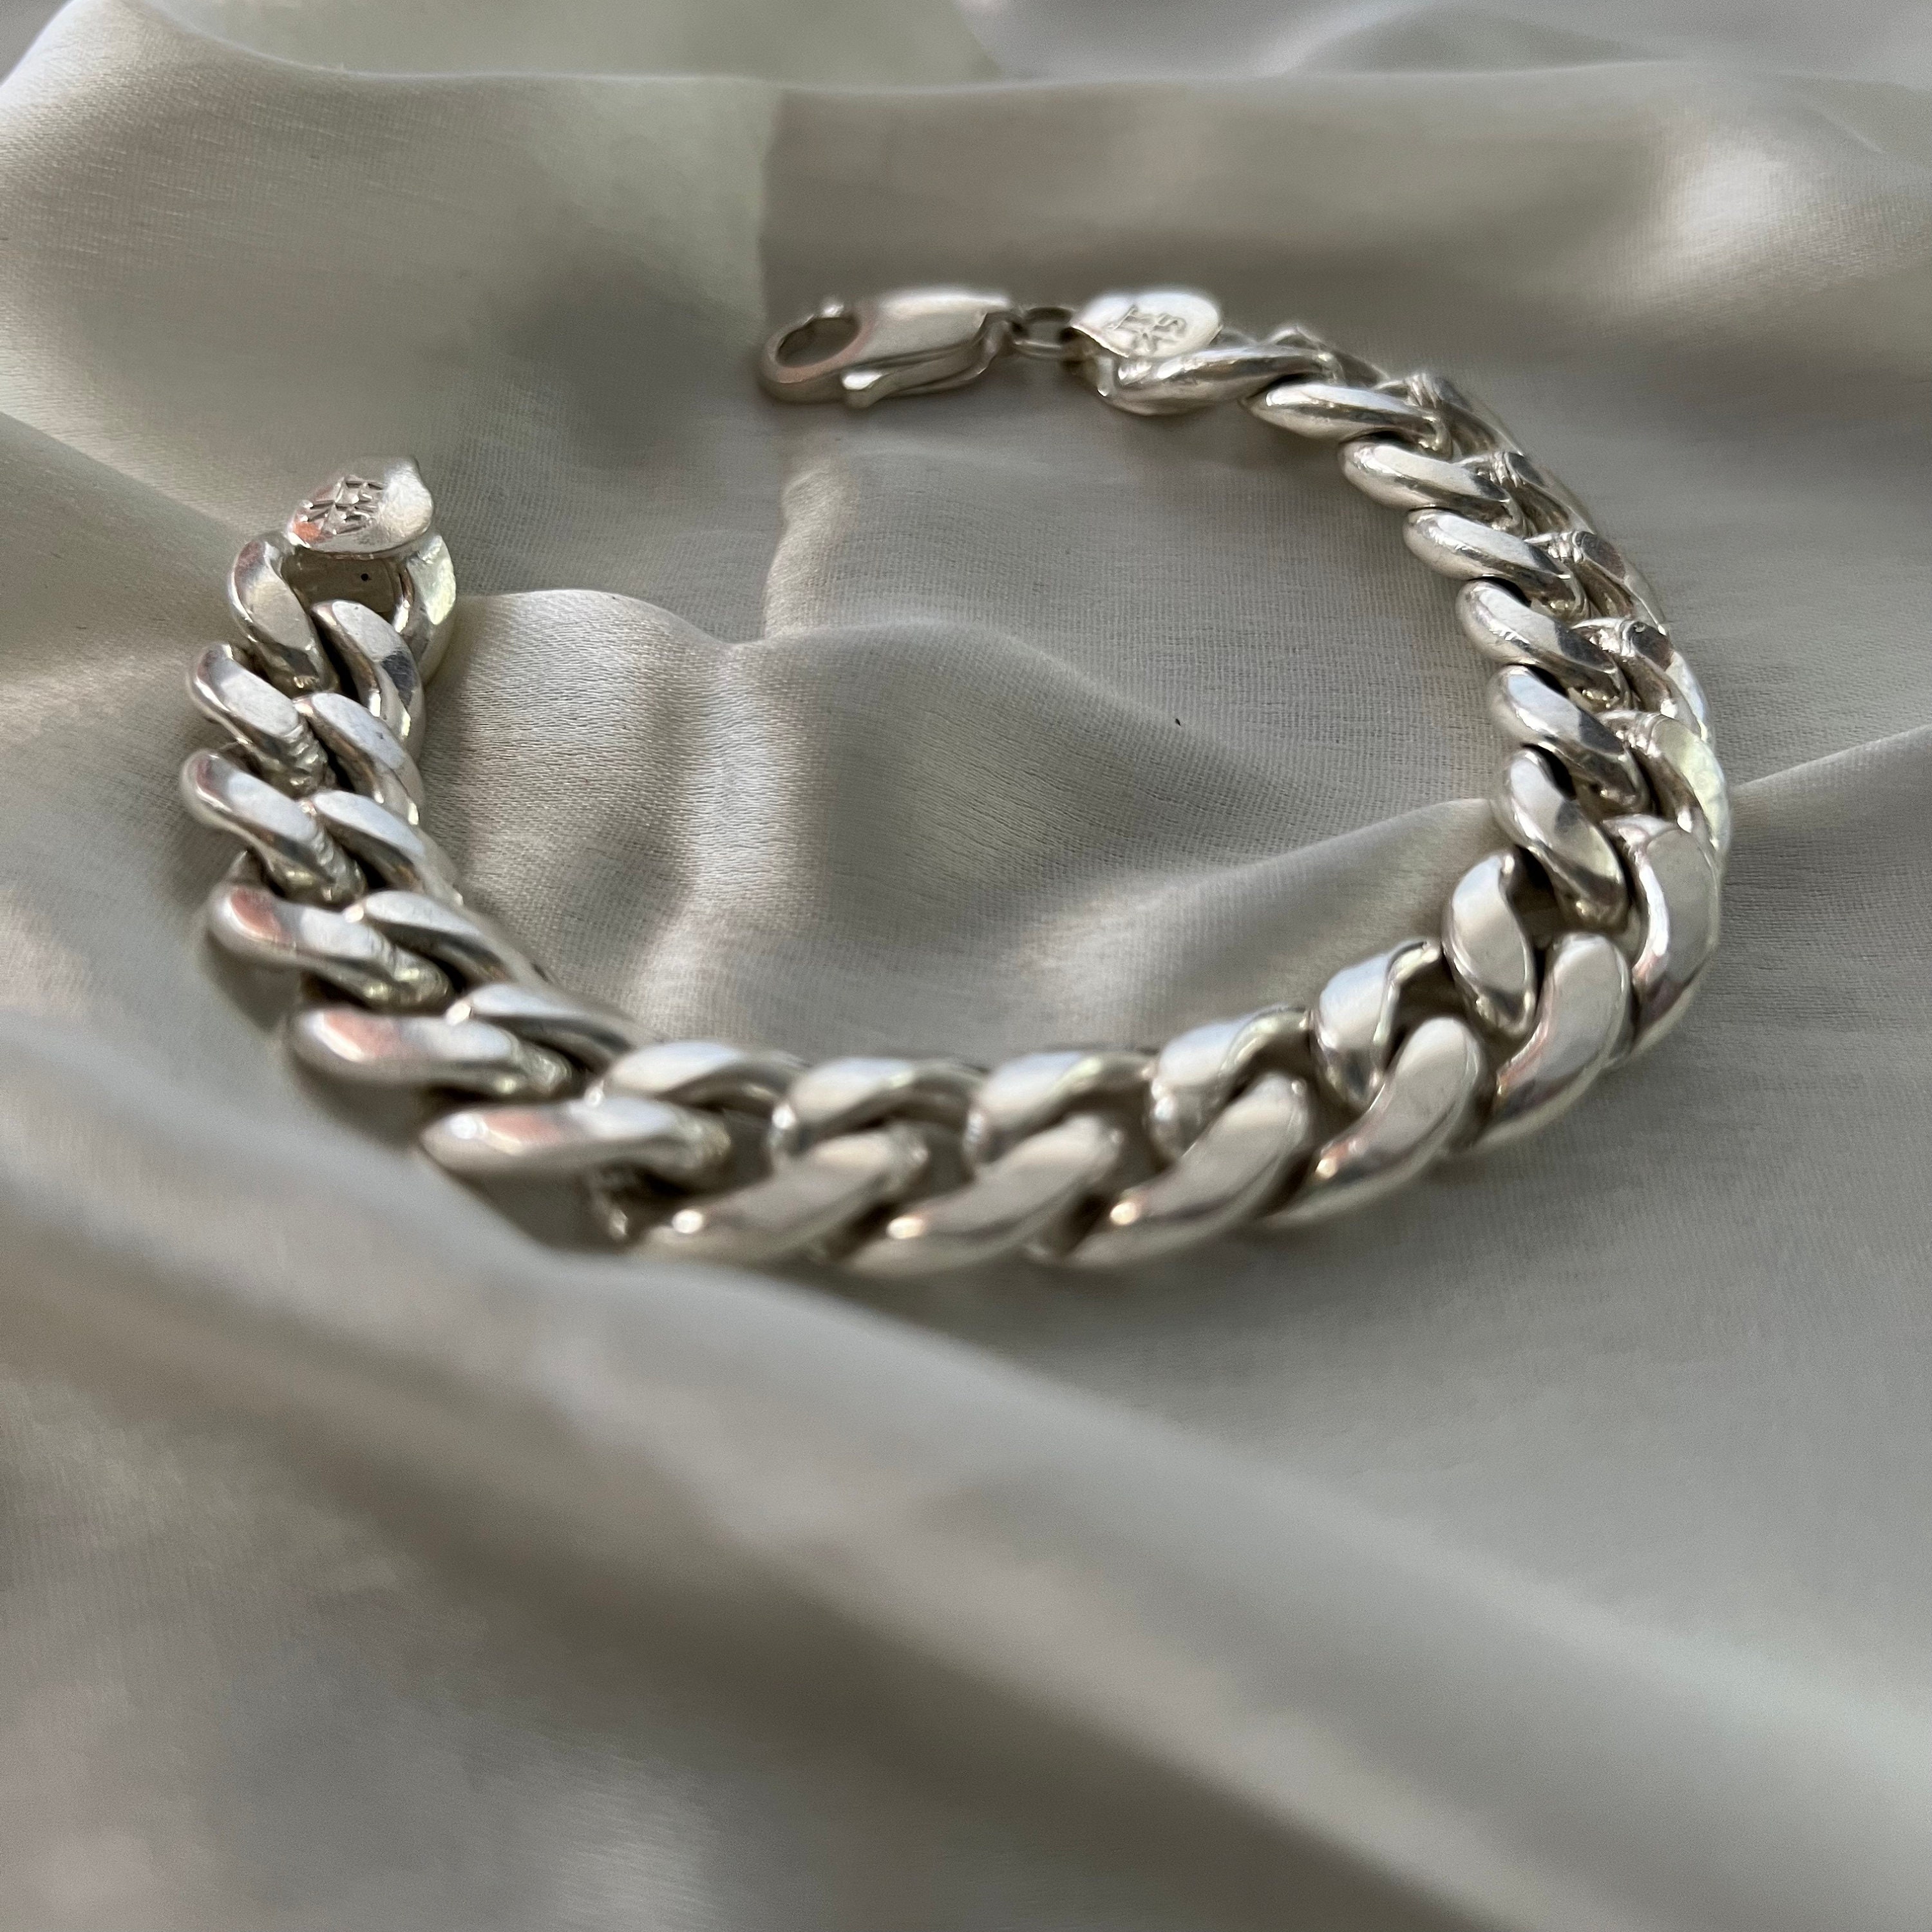 Men's Sterling Silver Thick String Braided Cuff Bracelet - Jewelry1000